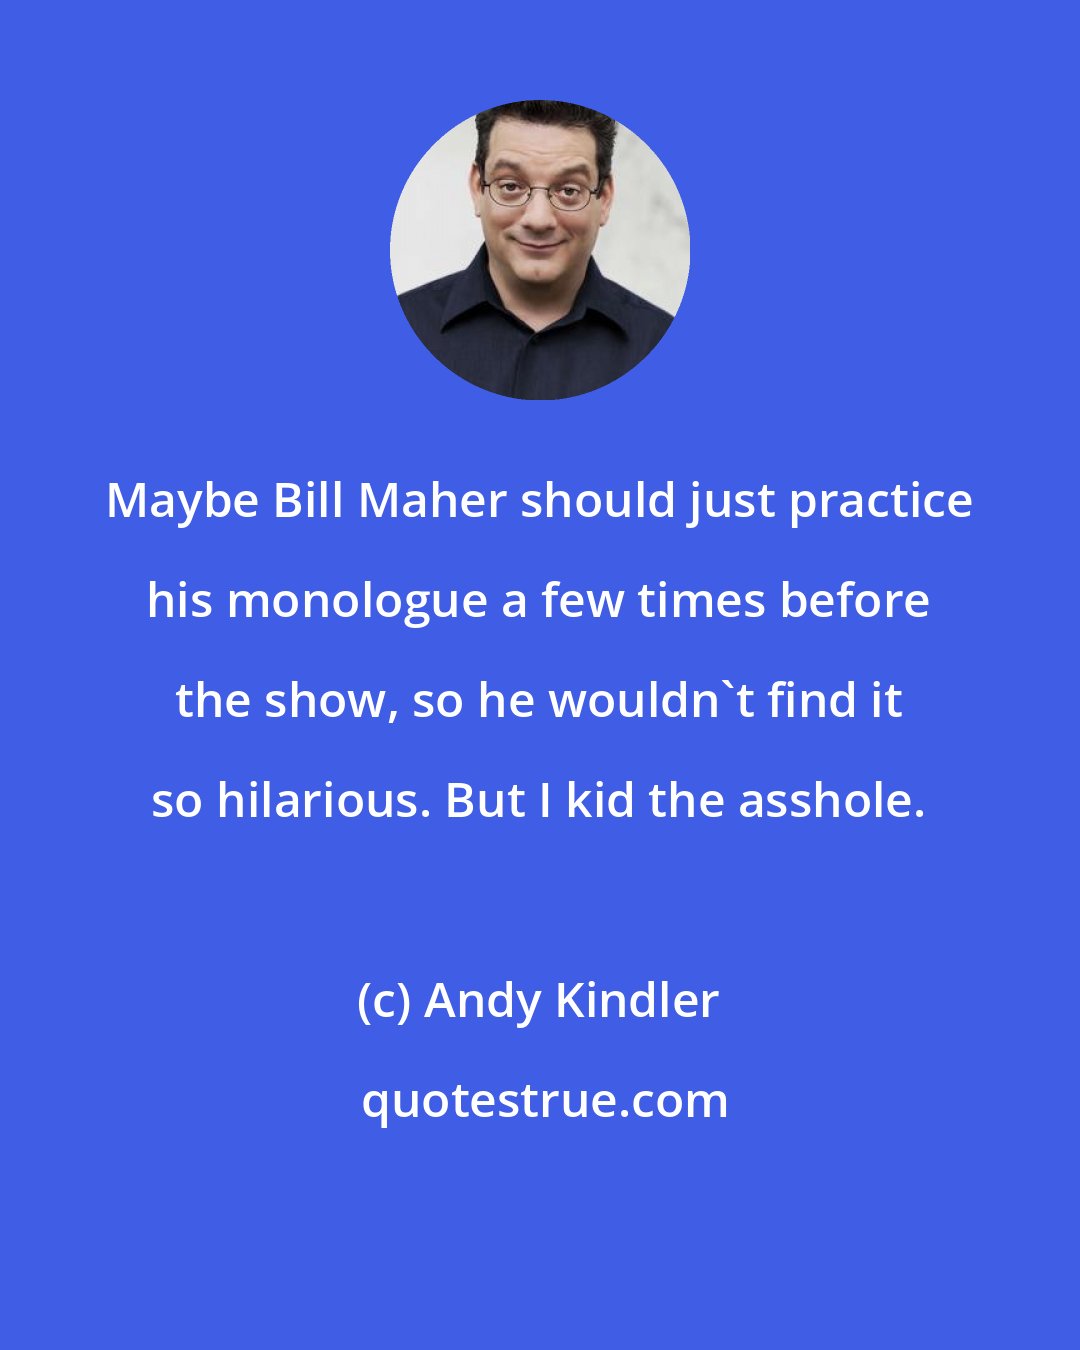 Andy Kindler: Maybe Bill Maher should just practice his monologue a few times before the show, so he wouldn't find it so hilarious. But I kid the asshole.